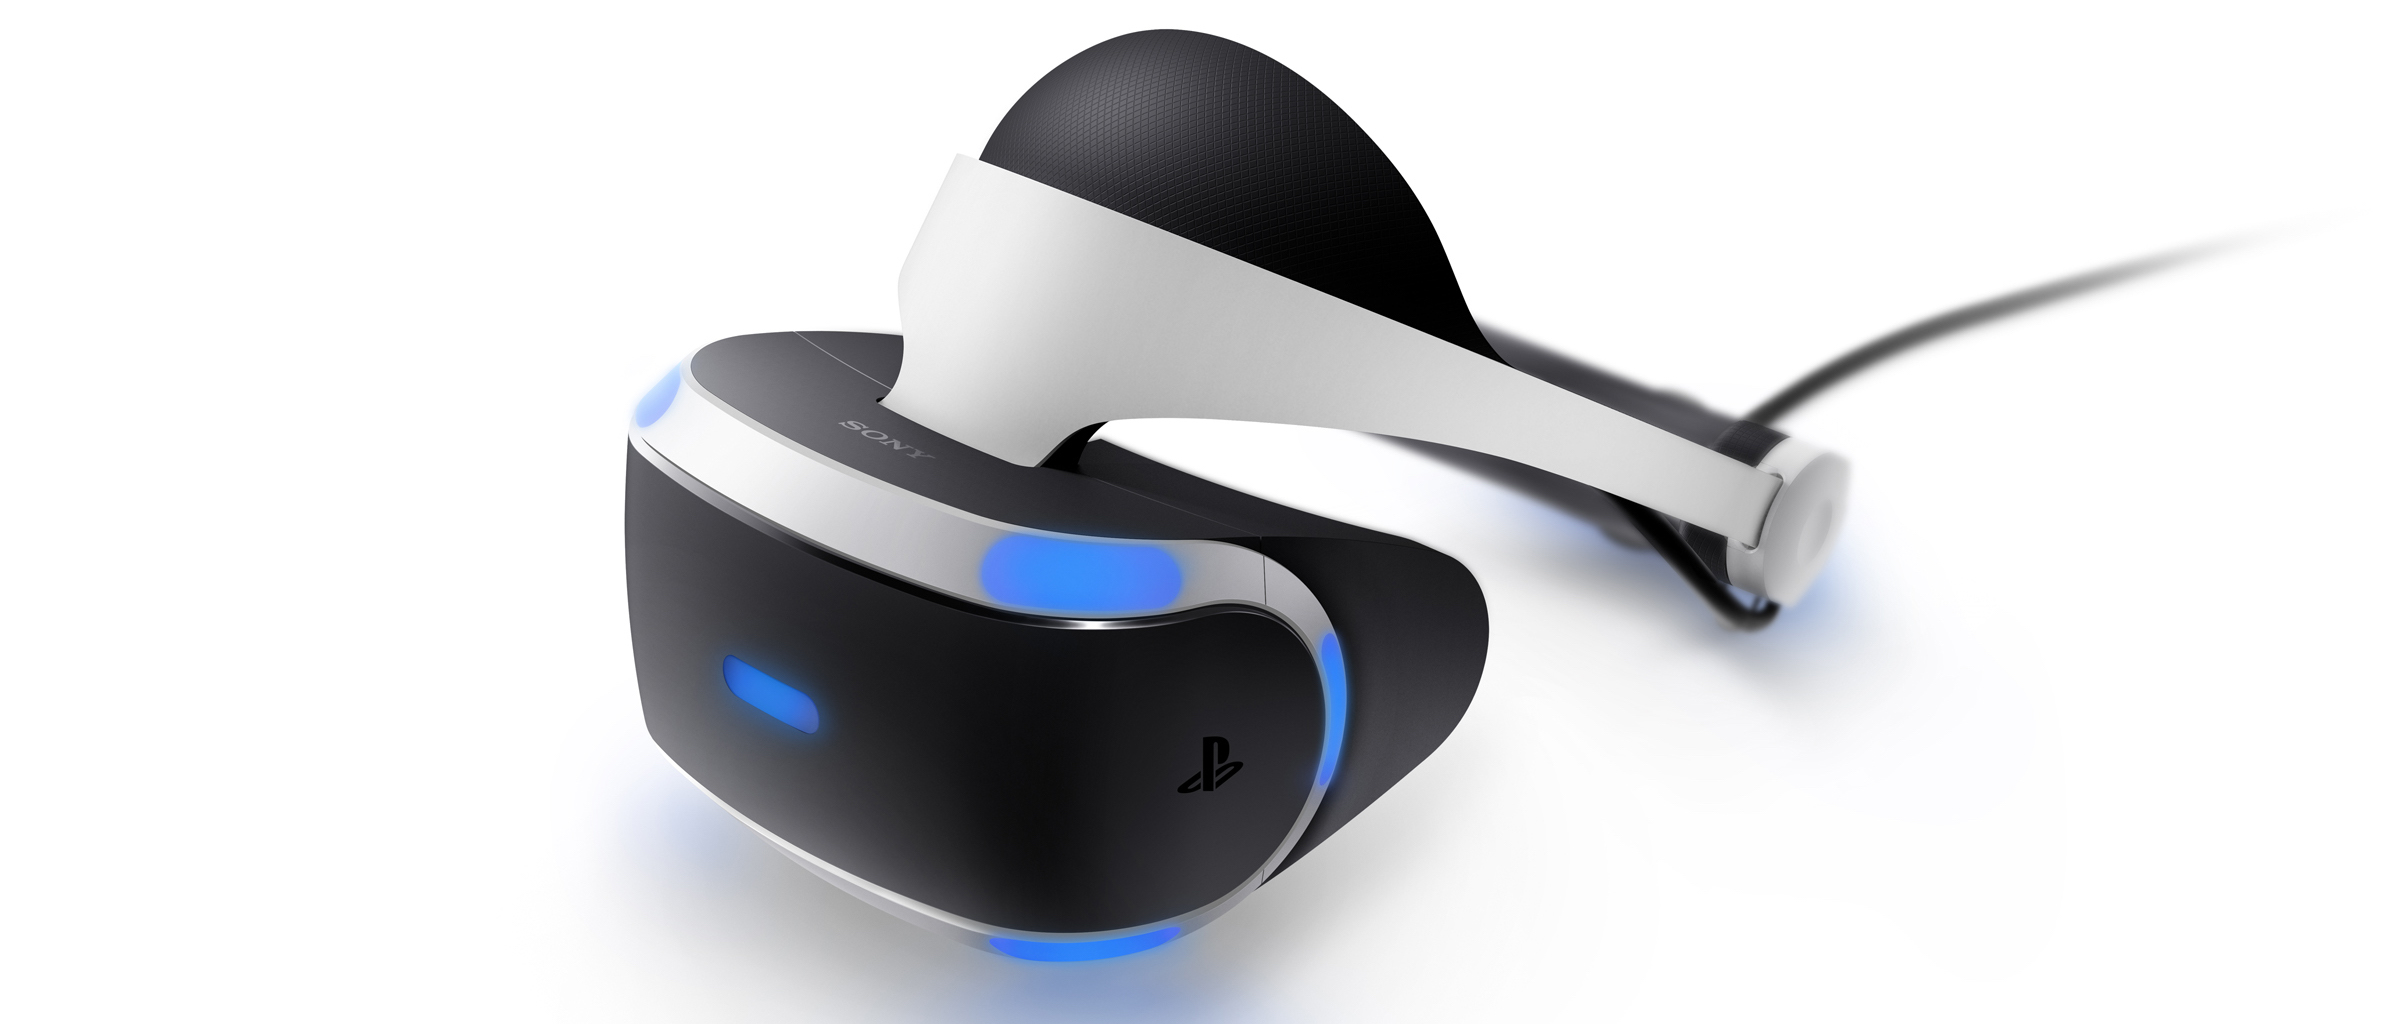 which is better oculus or playstation vr